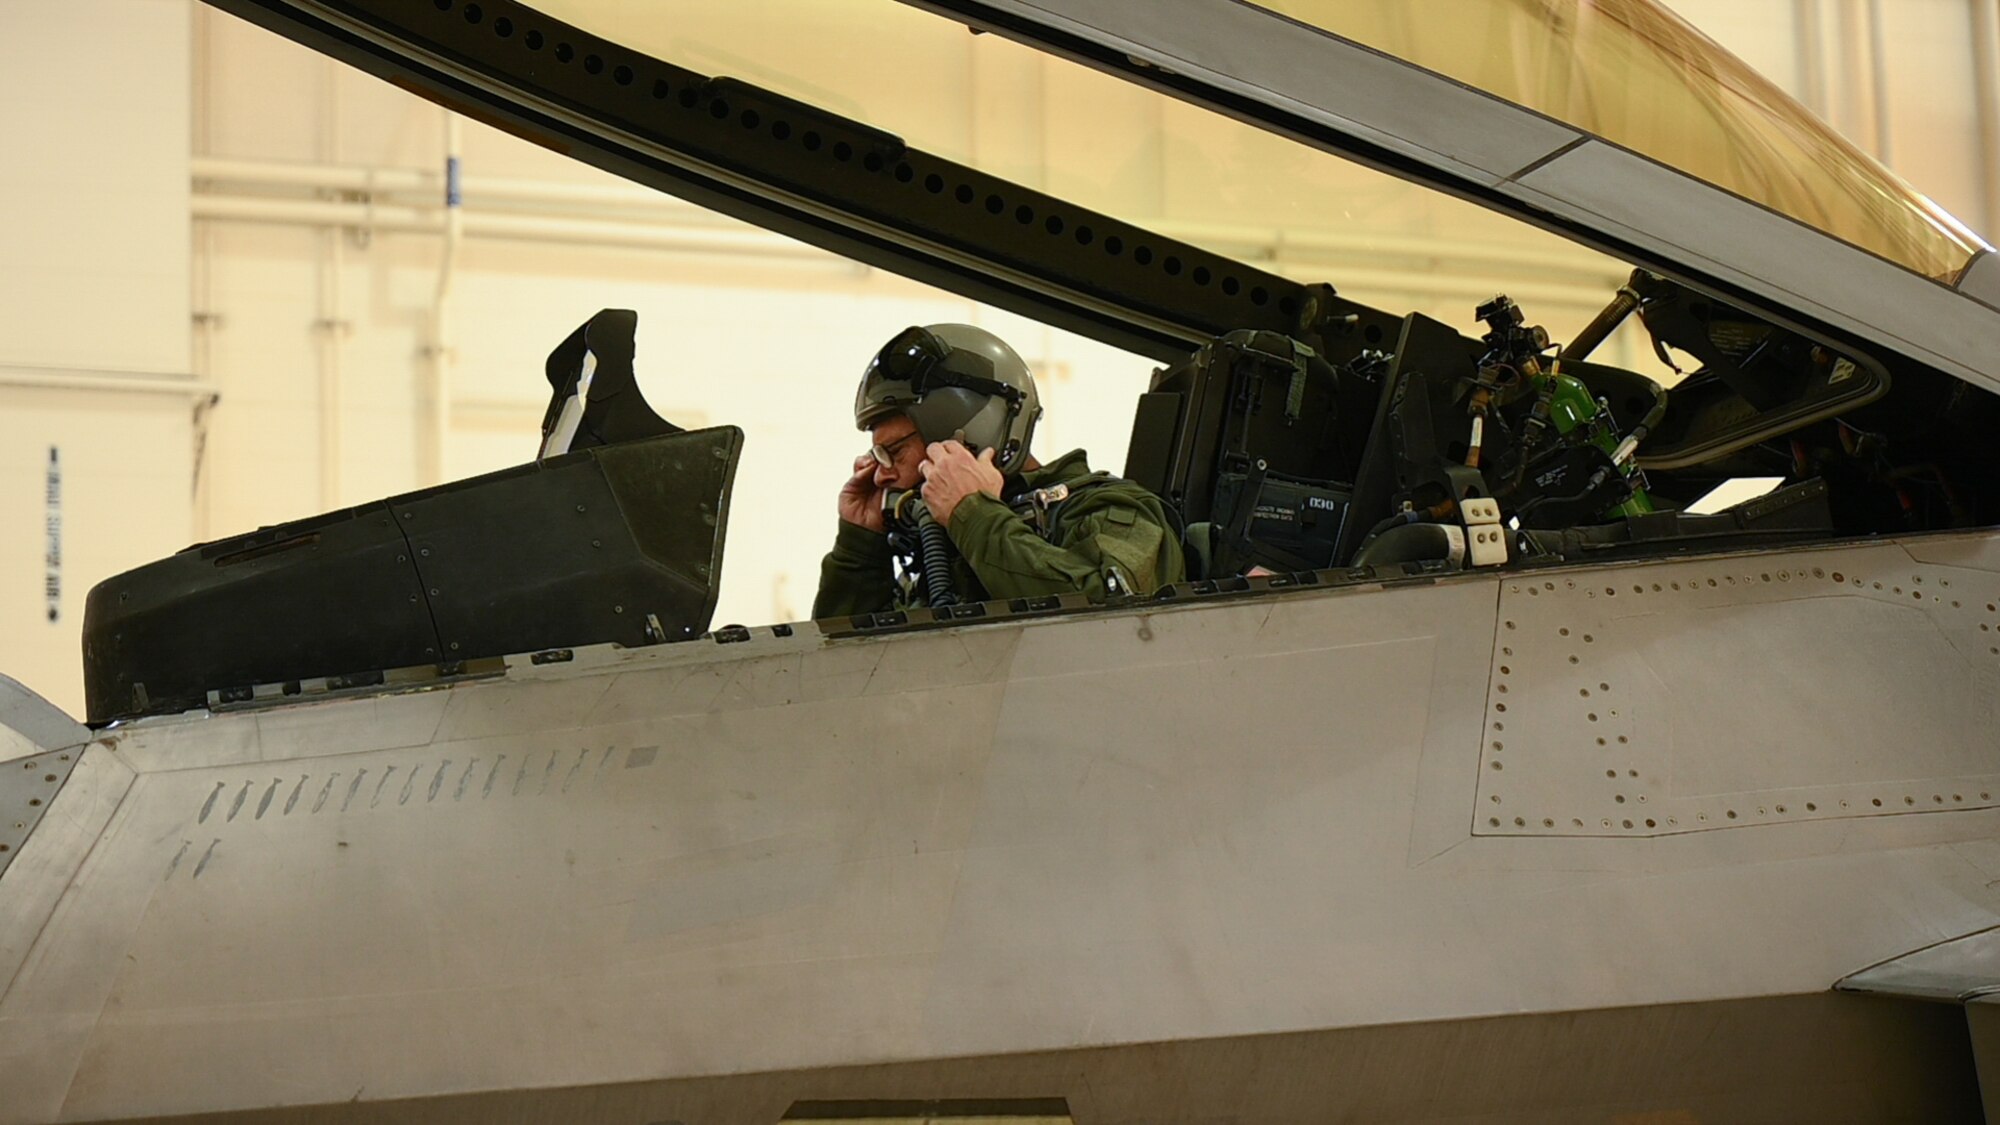 PACAF commander prepares to taxi in an F-22 Raptor aircraft.